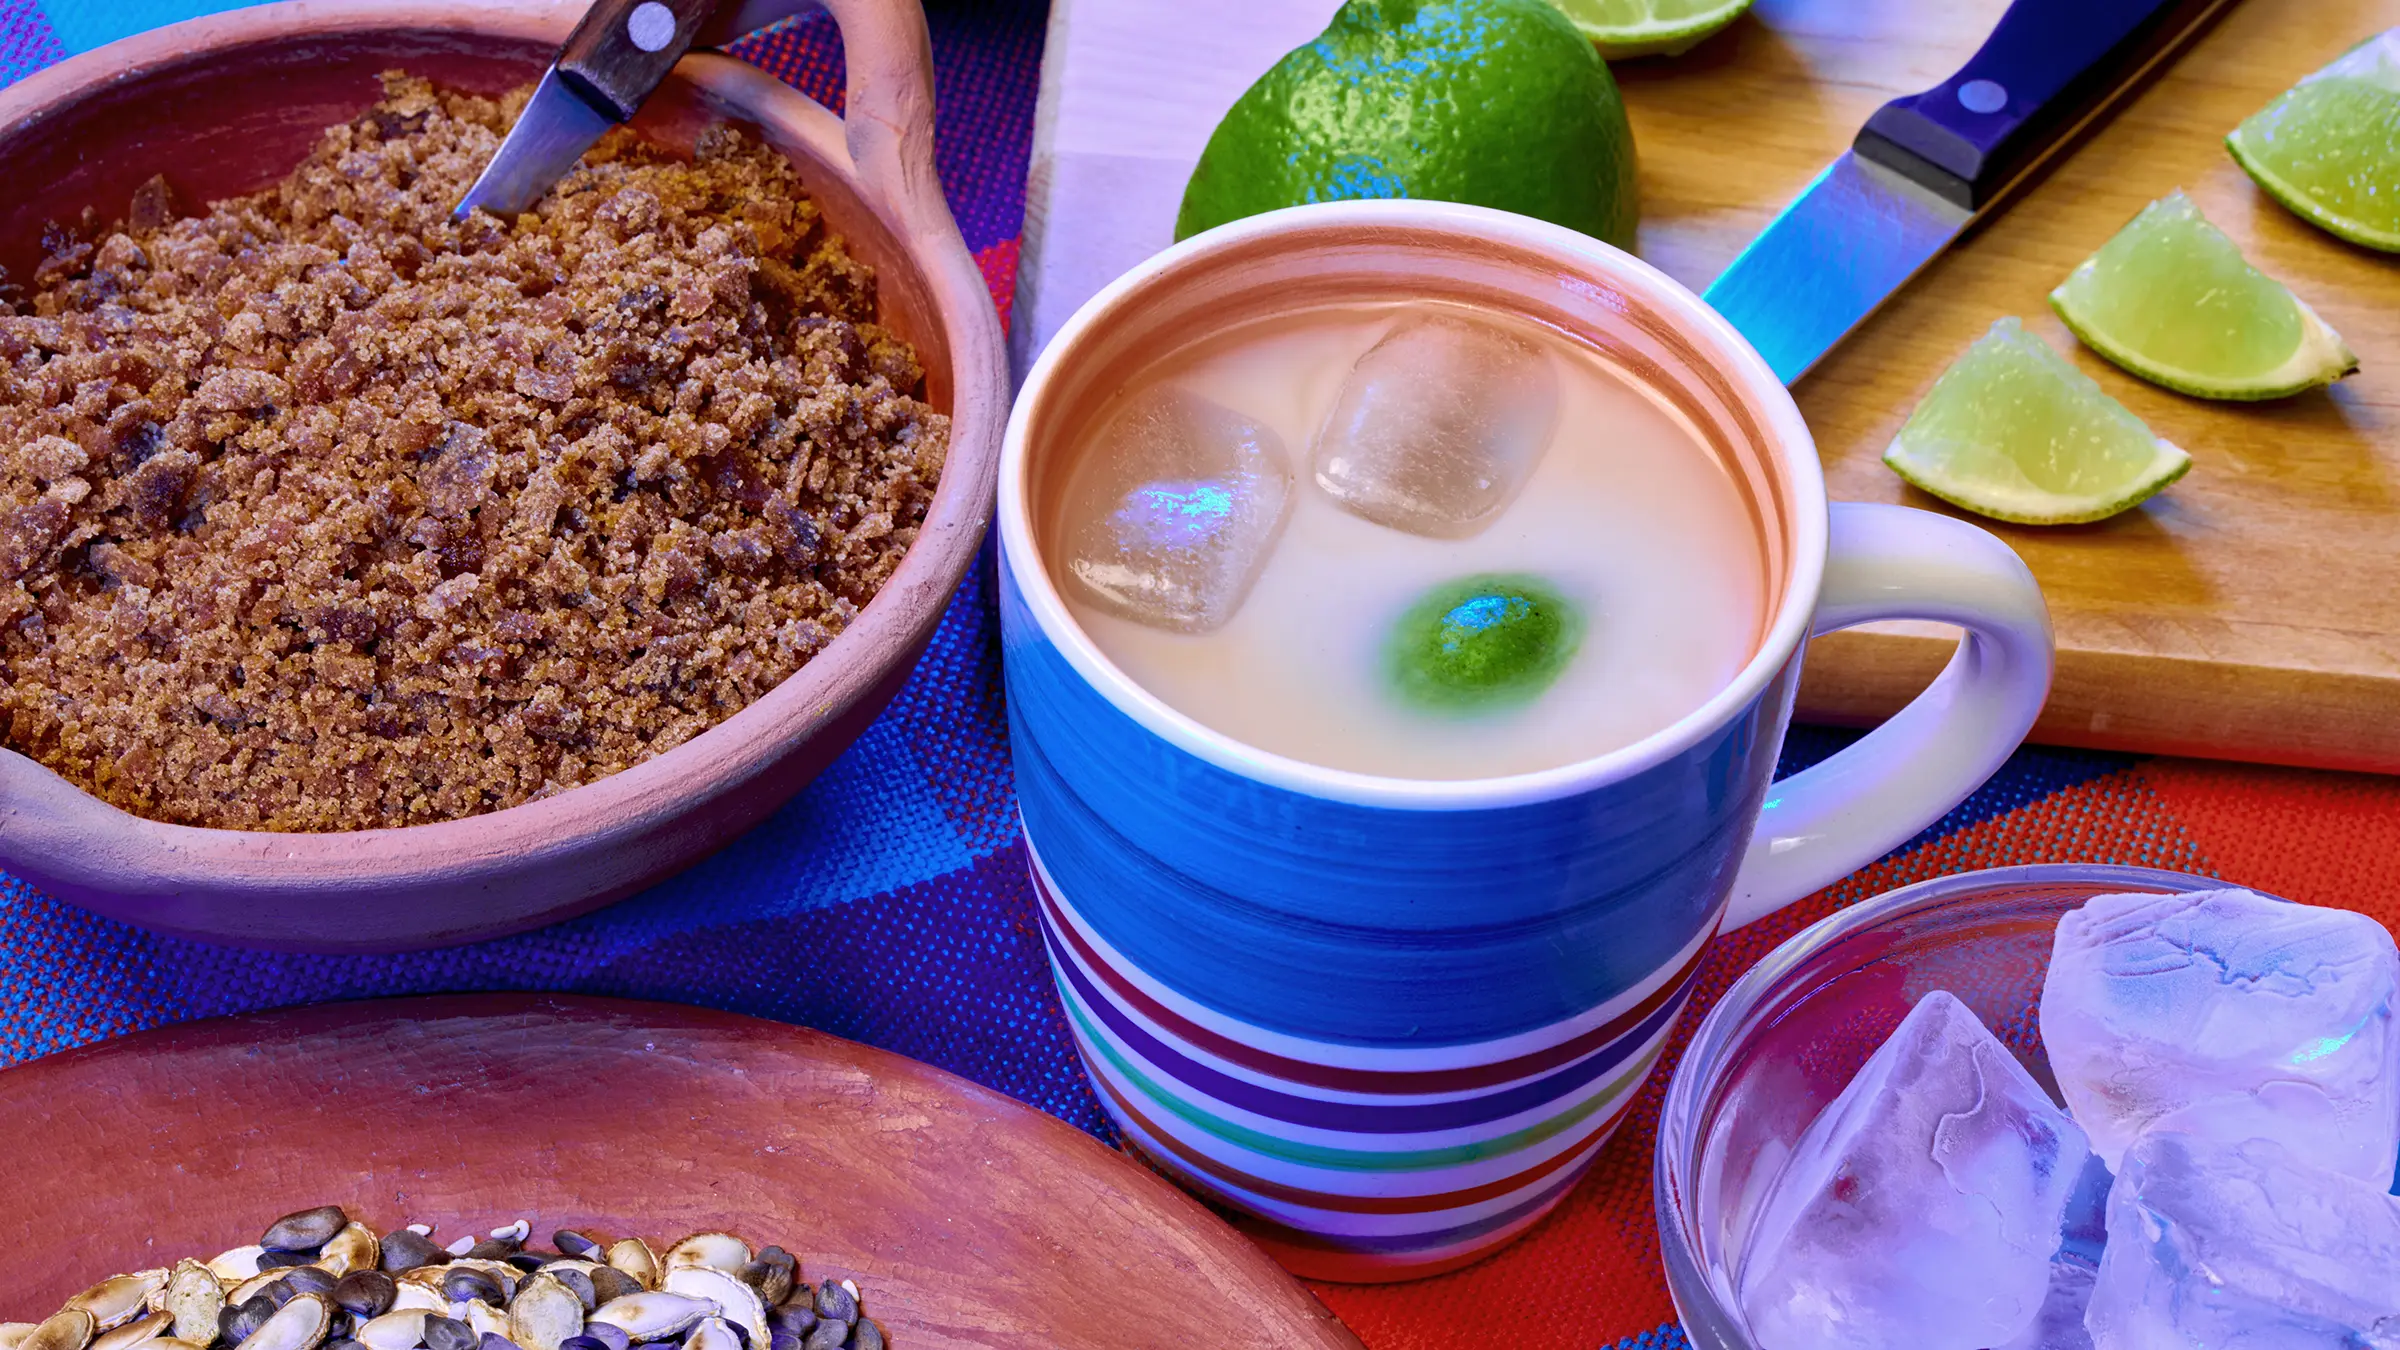 How to prepare Horchata